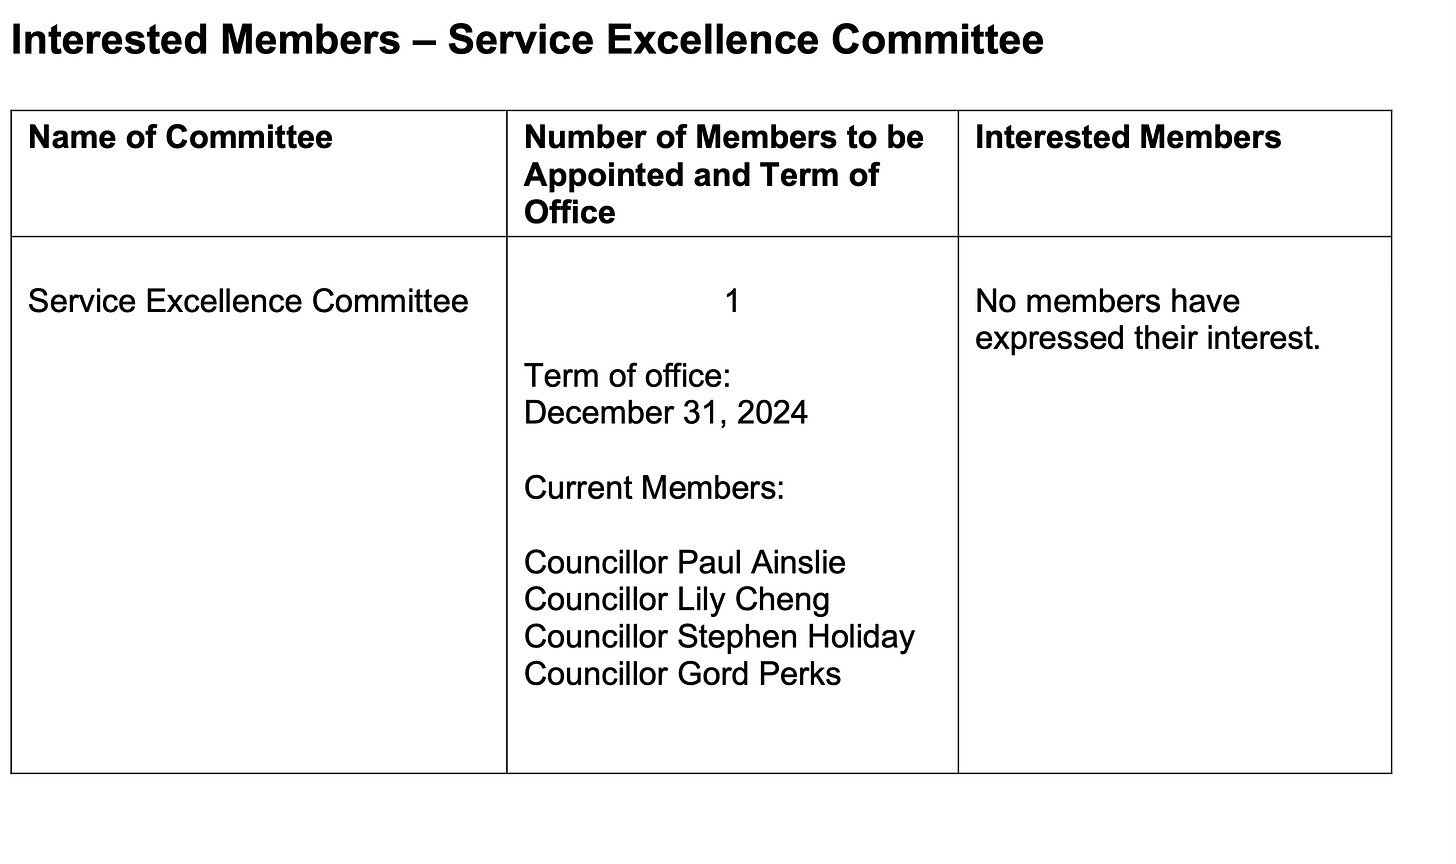 Excerpt from report showing no councillor interest in Service Excellence Committee